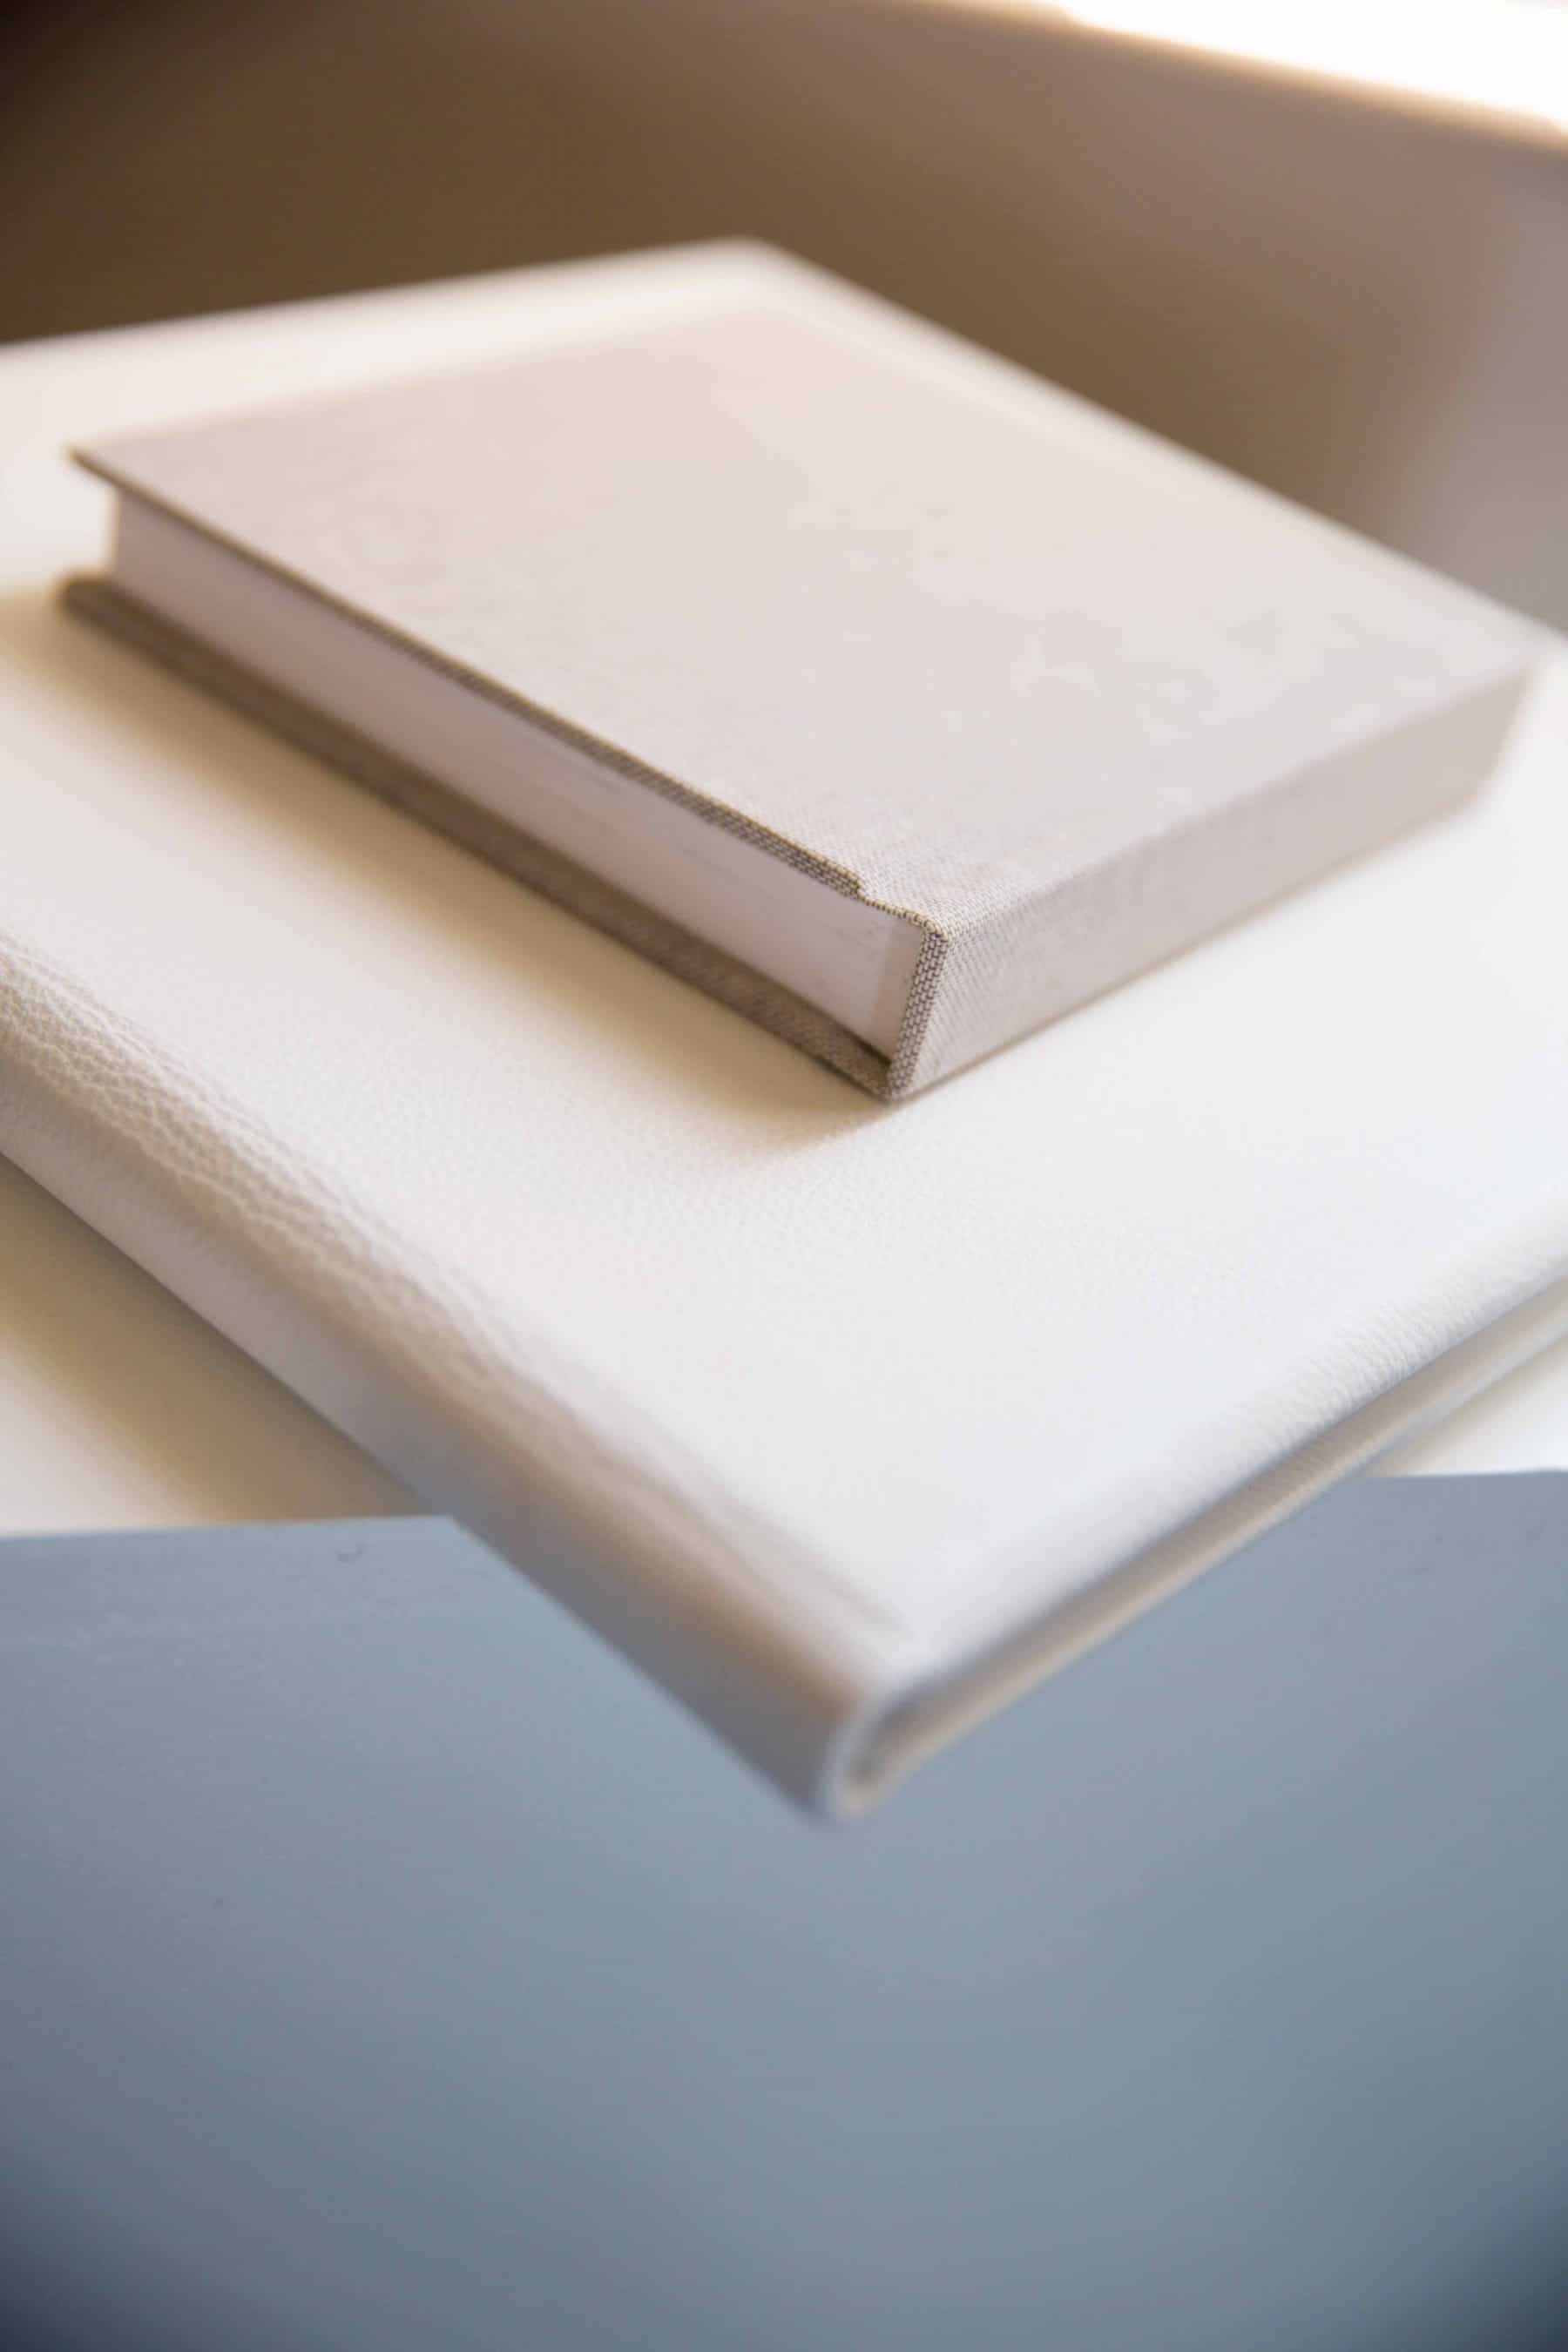 showing the different sizes of the wedding albums stock both small and large